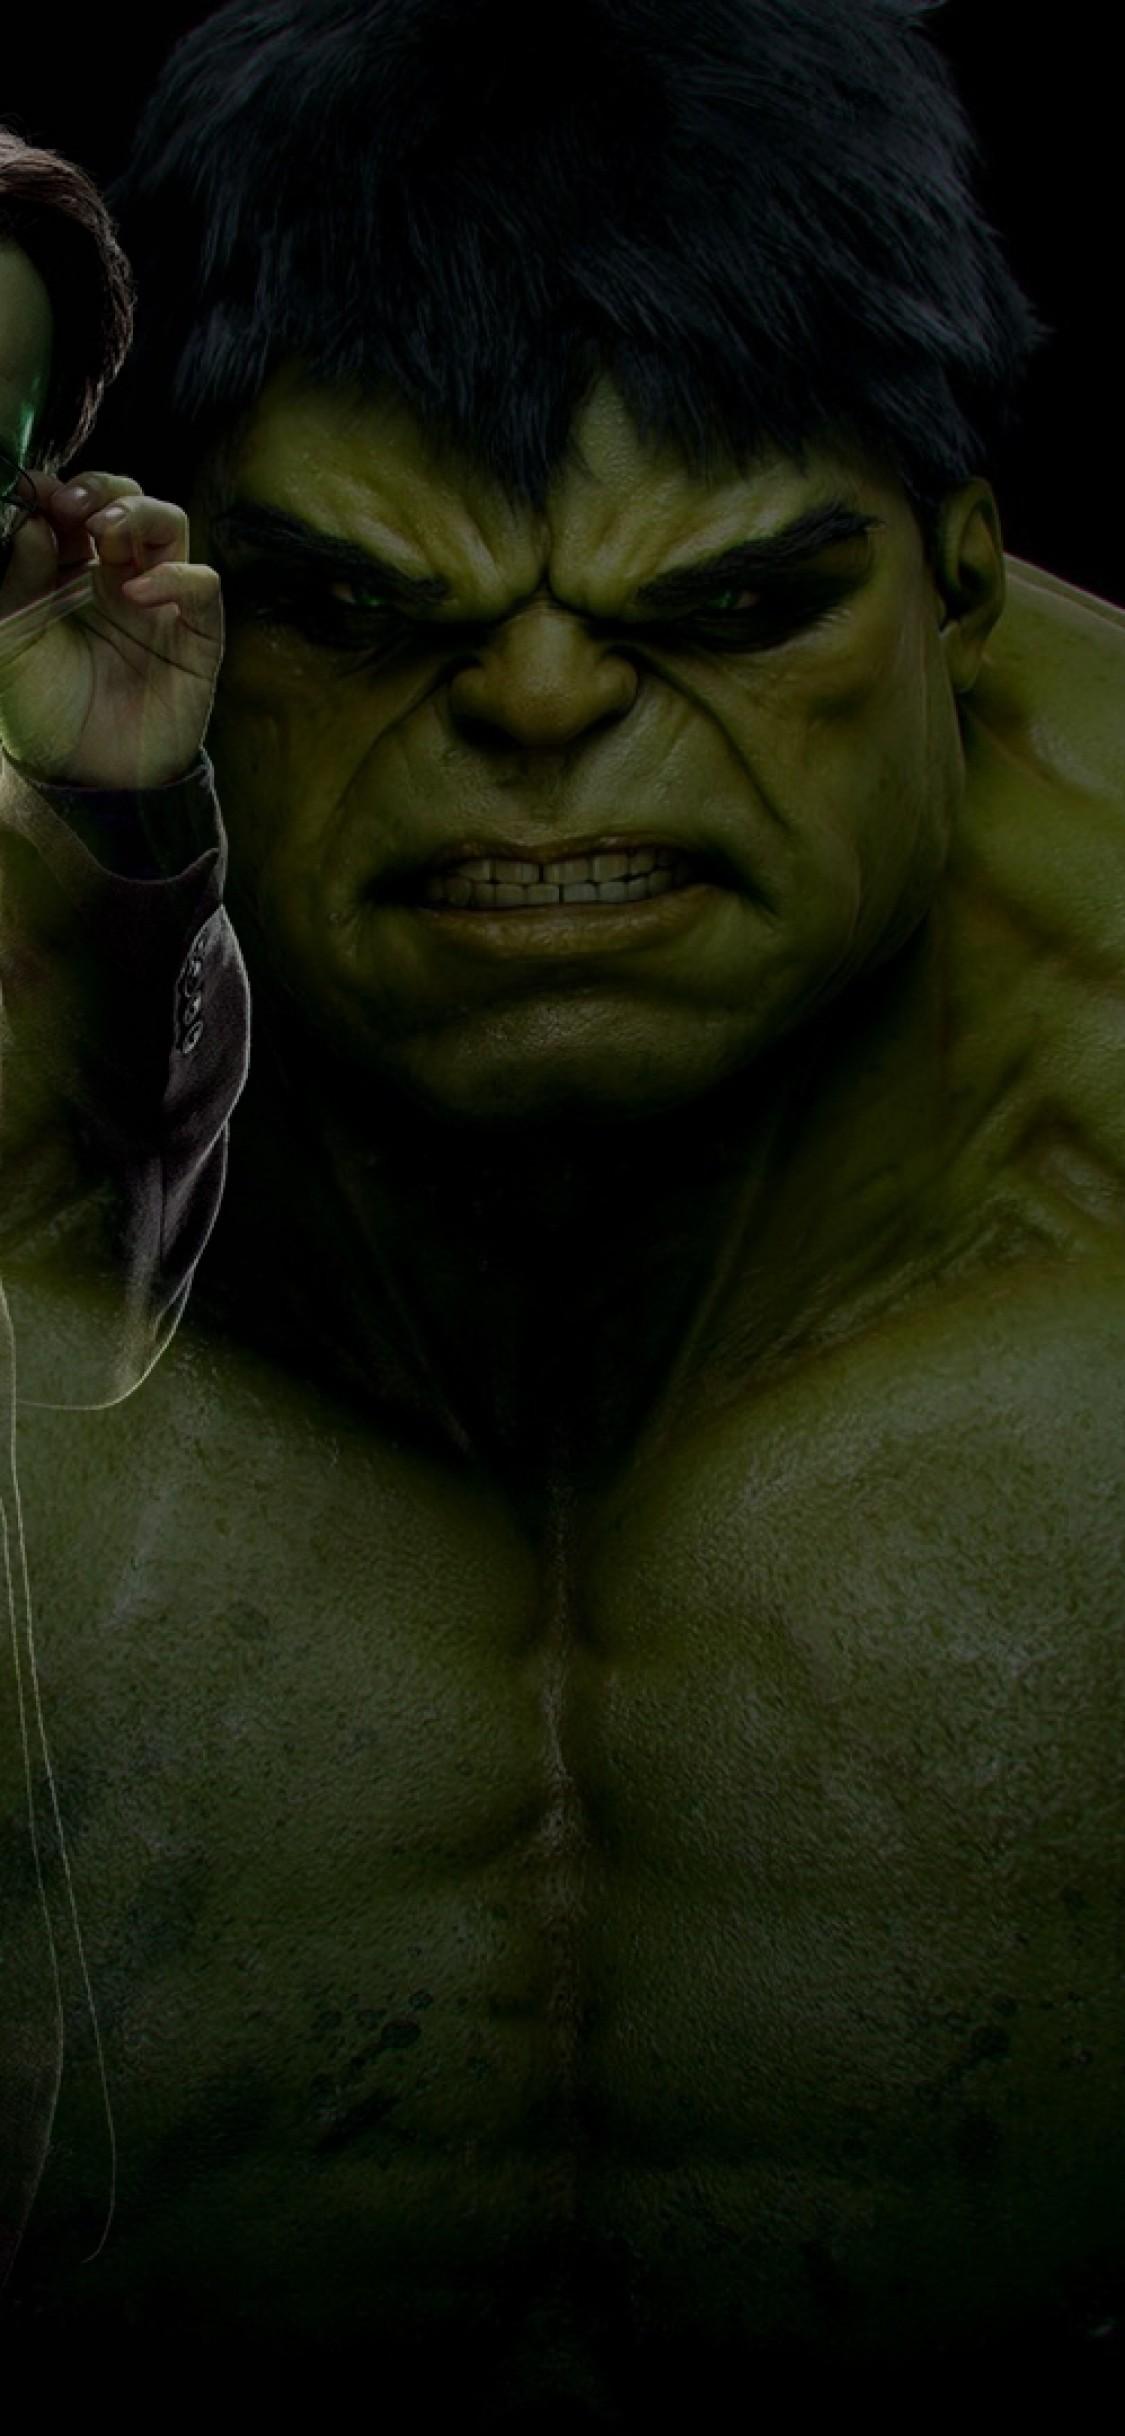 Download 1125x2436 The Avengers, Hulk Wallpaper for iPhone